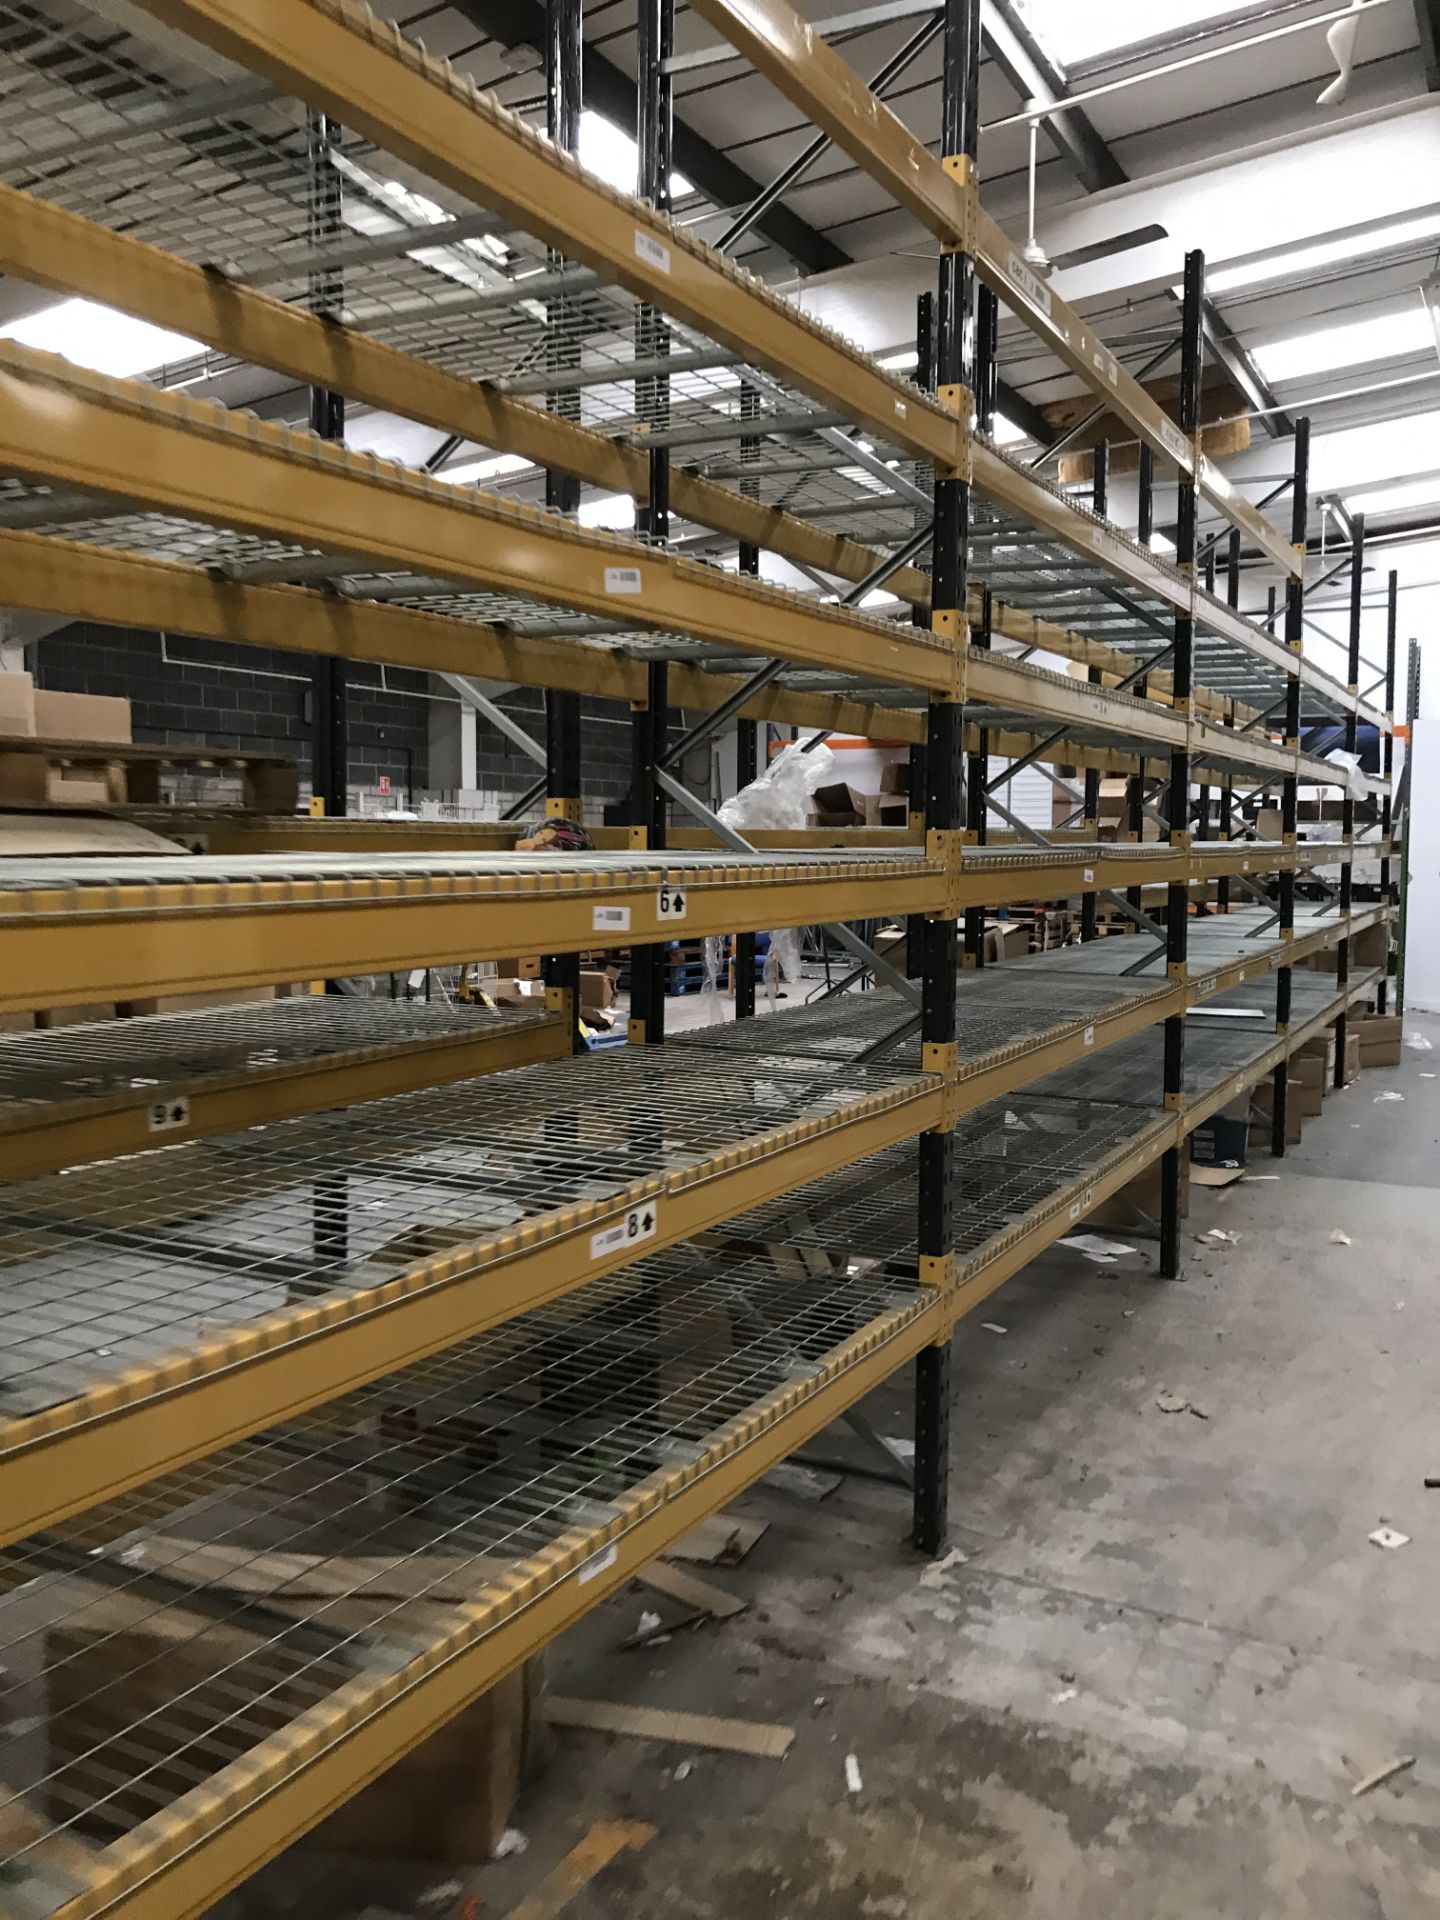 Link 51 11-Bay Mainly Six-Tier Boltless Pallet Racking, each bay approx. 2.8m long x 4m high x 900mm - Image 11 of 15